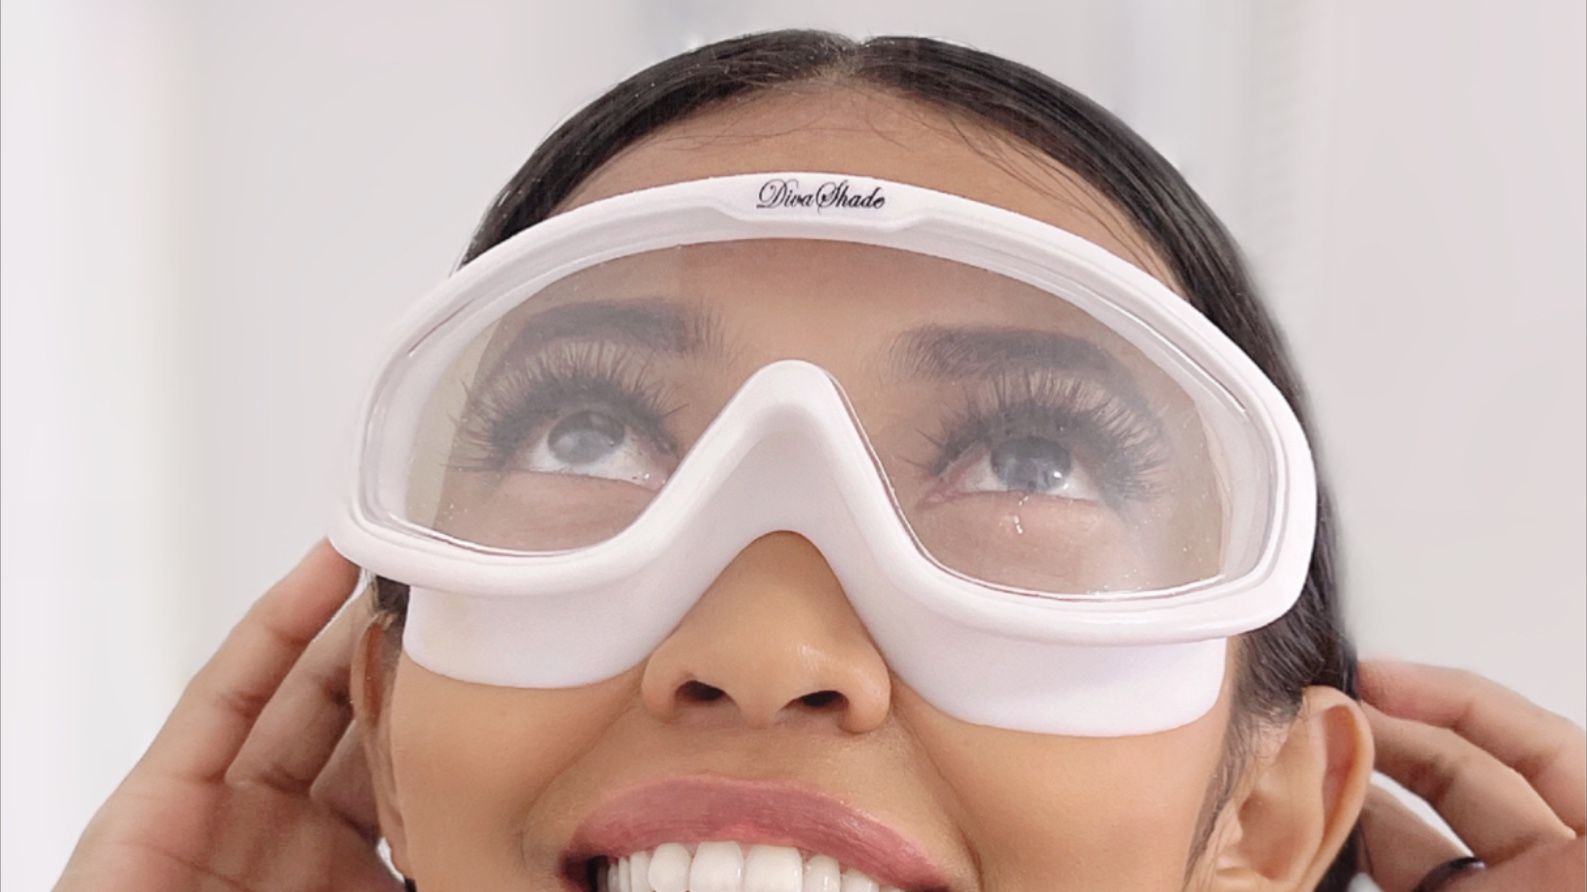 Using goggles is the most effective way to protect your eyes when swimming